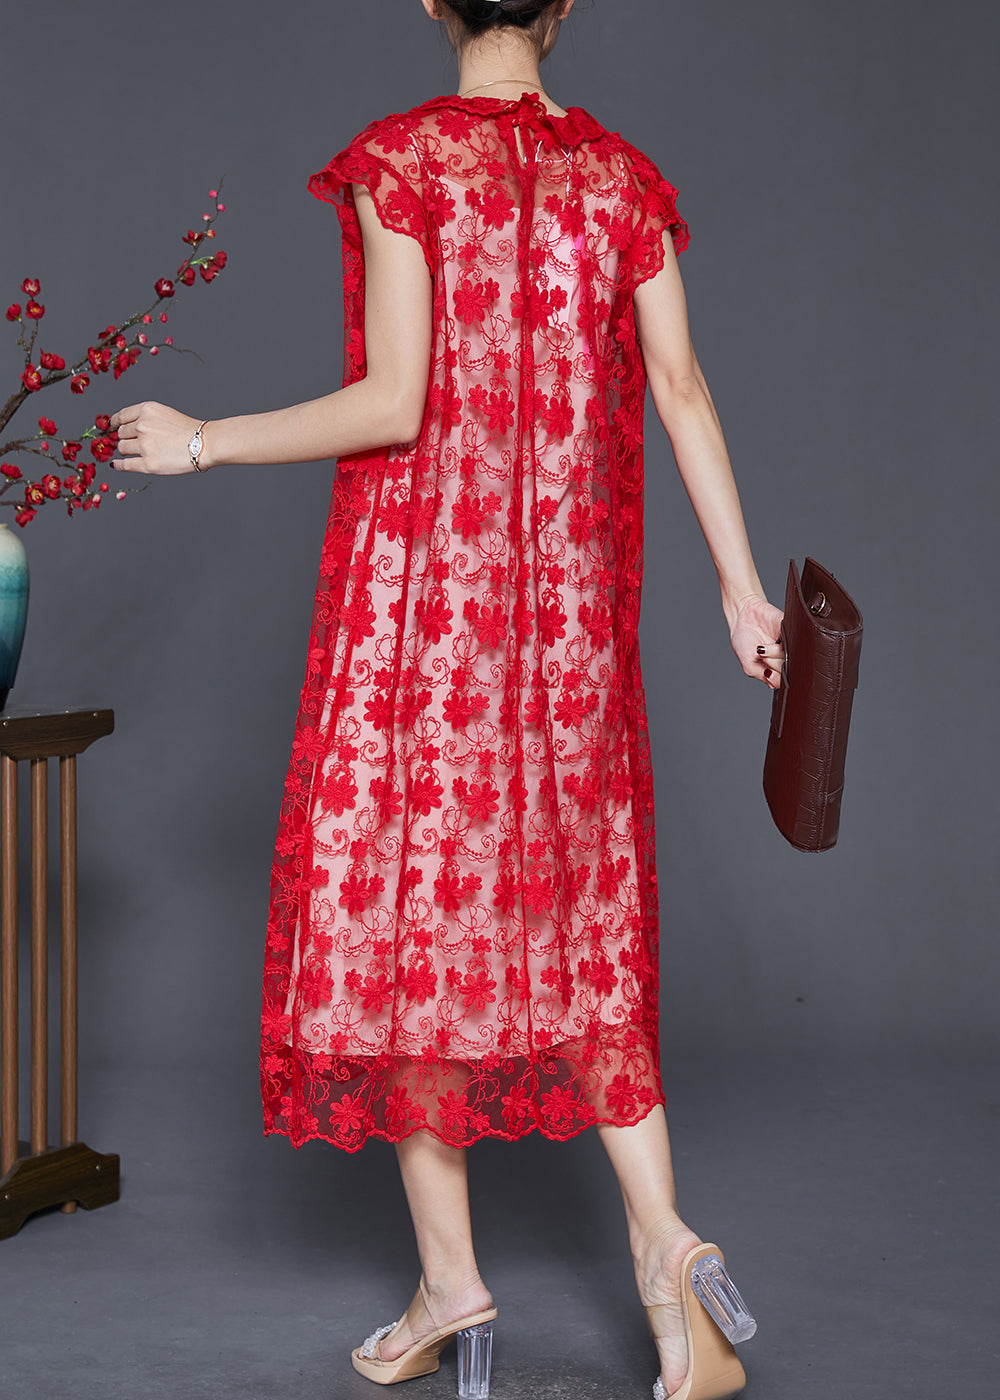 Style Red Ruffled Embroidered Hollow Out Tulle Dress Summer